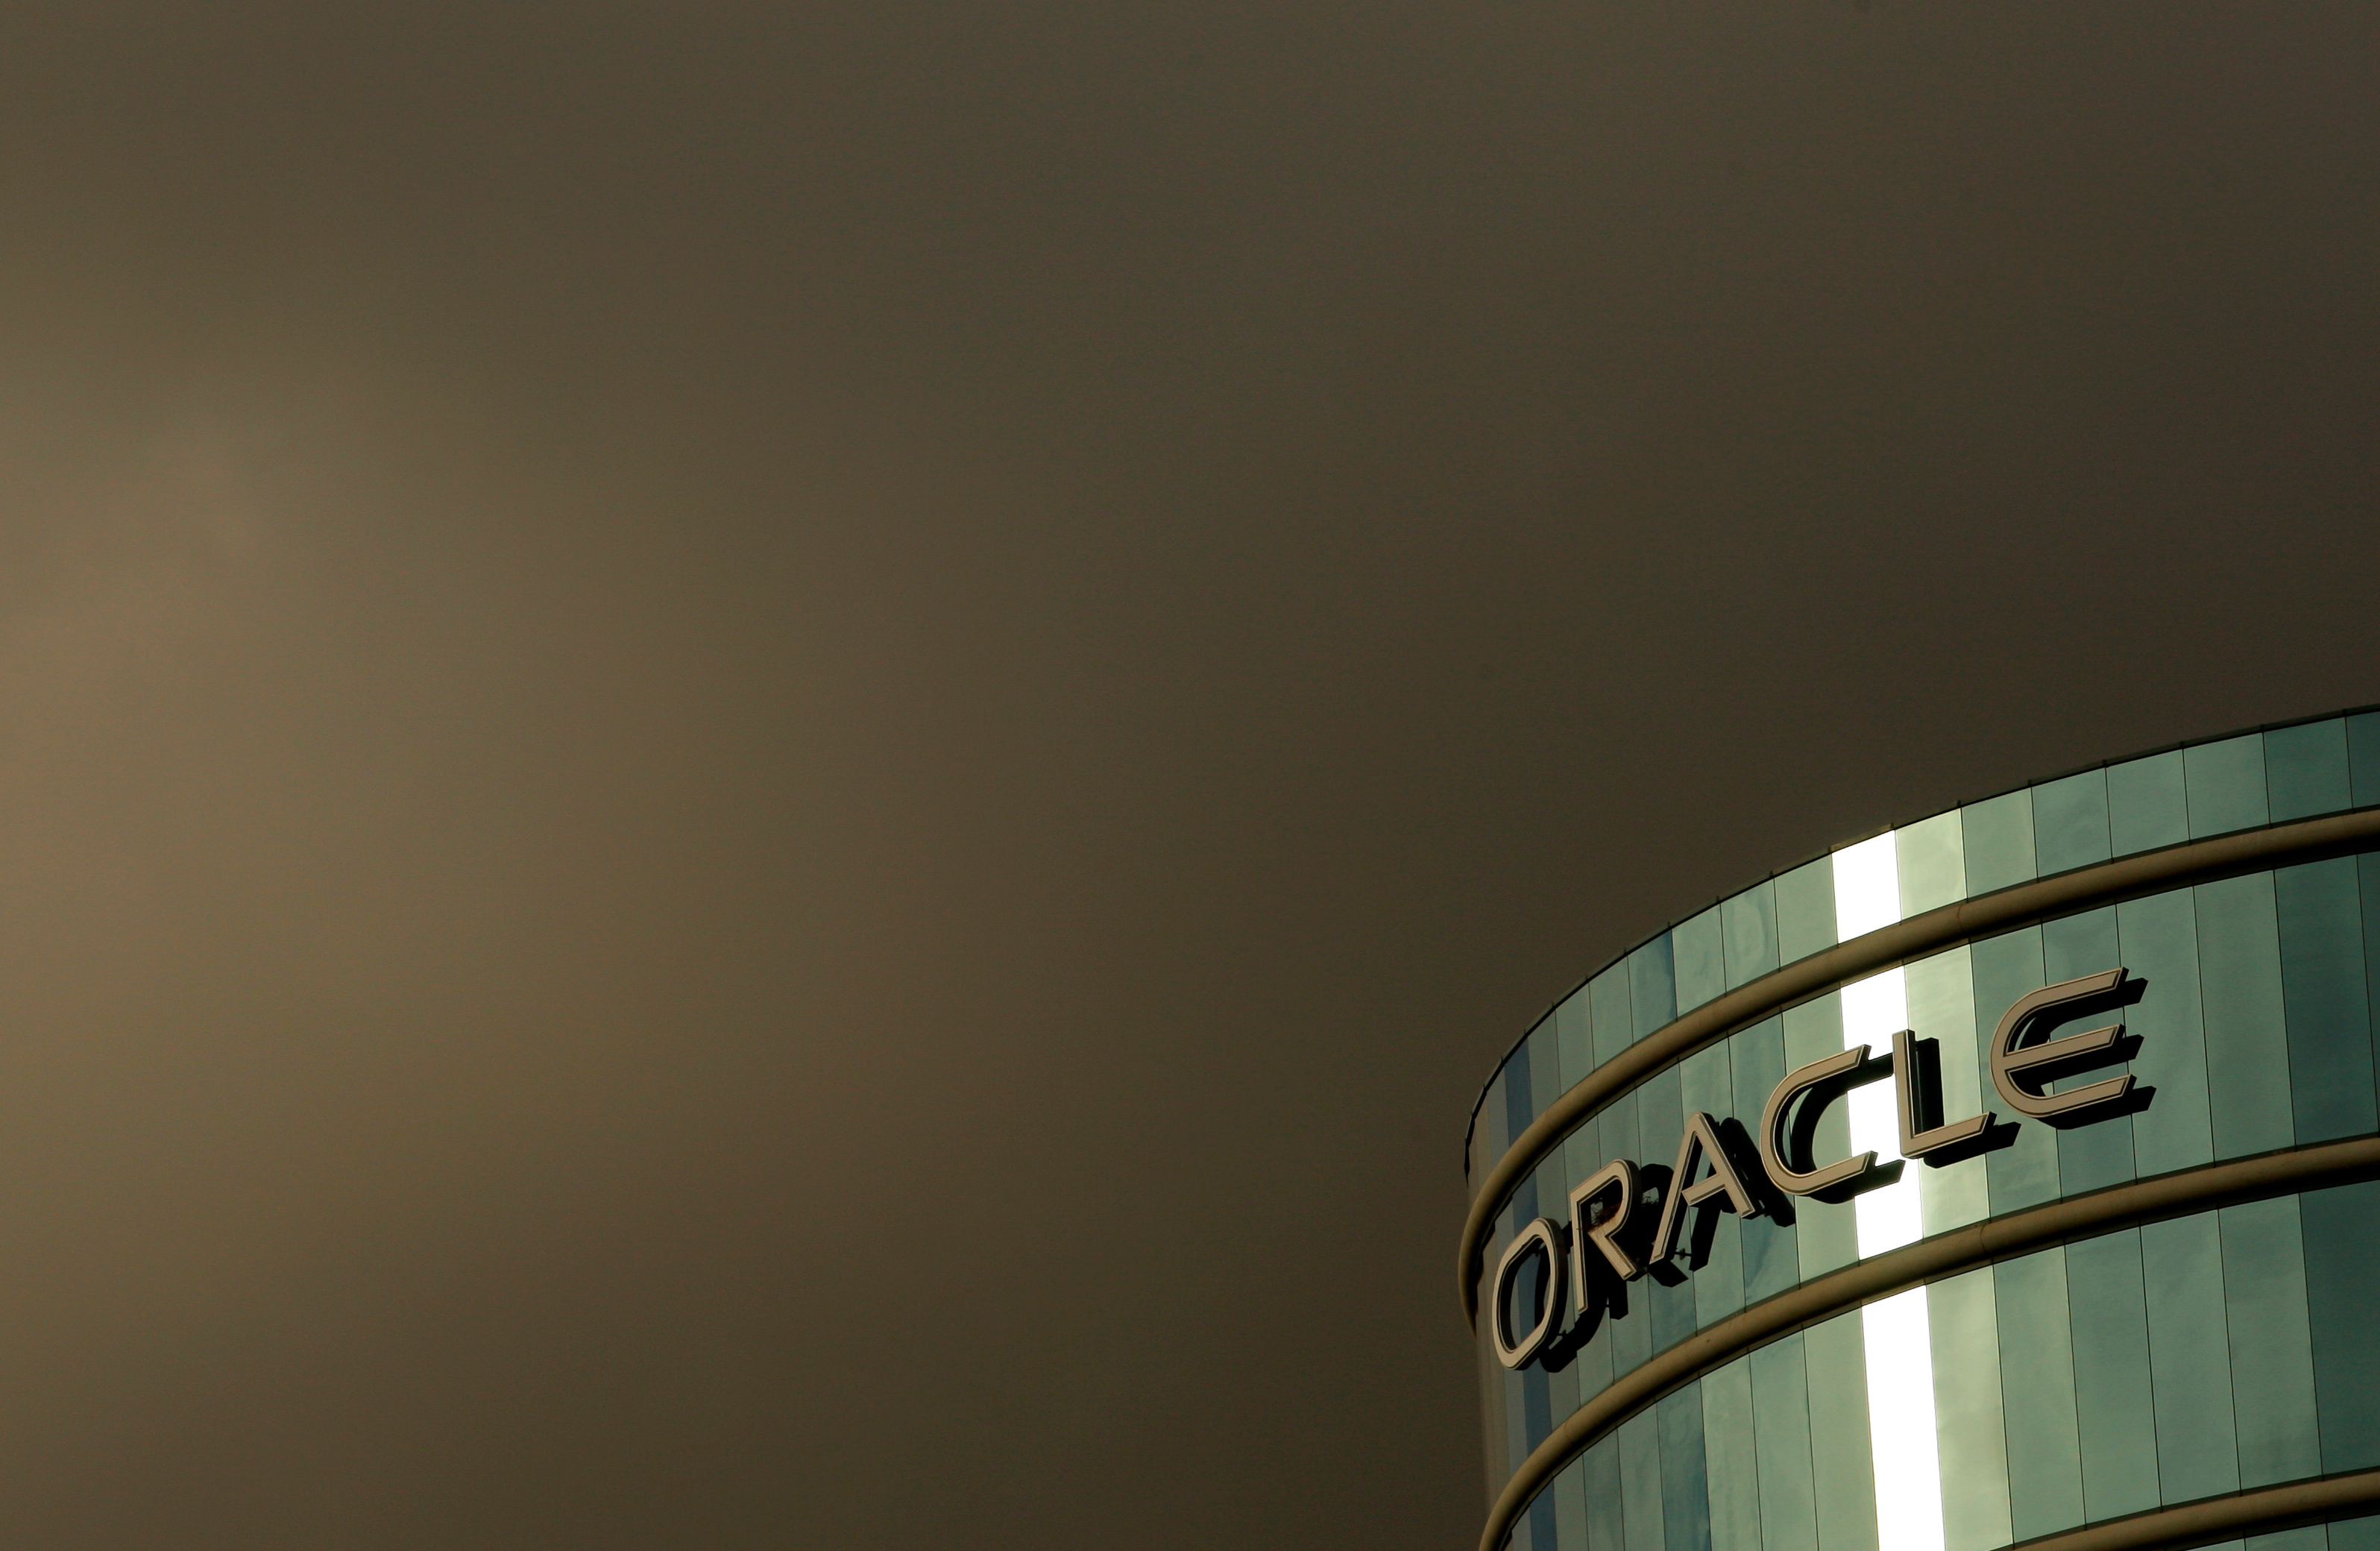 Company logo shown at headquarters for Oracle Corp shown in Redwood City